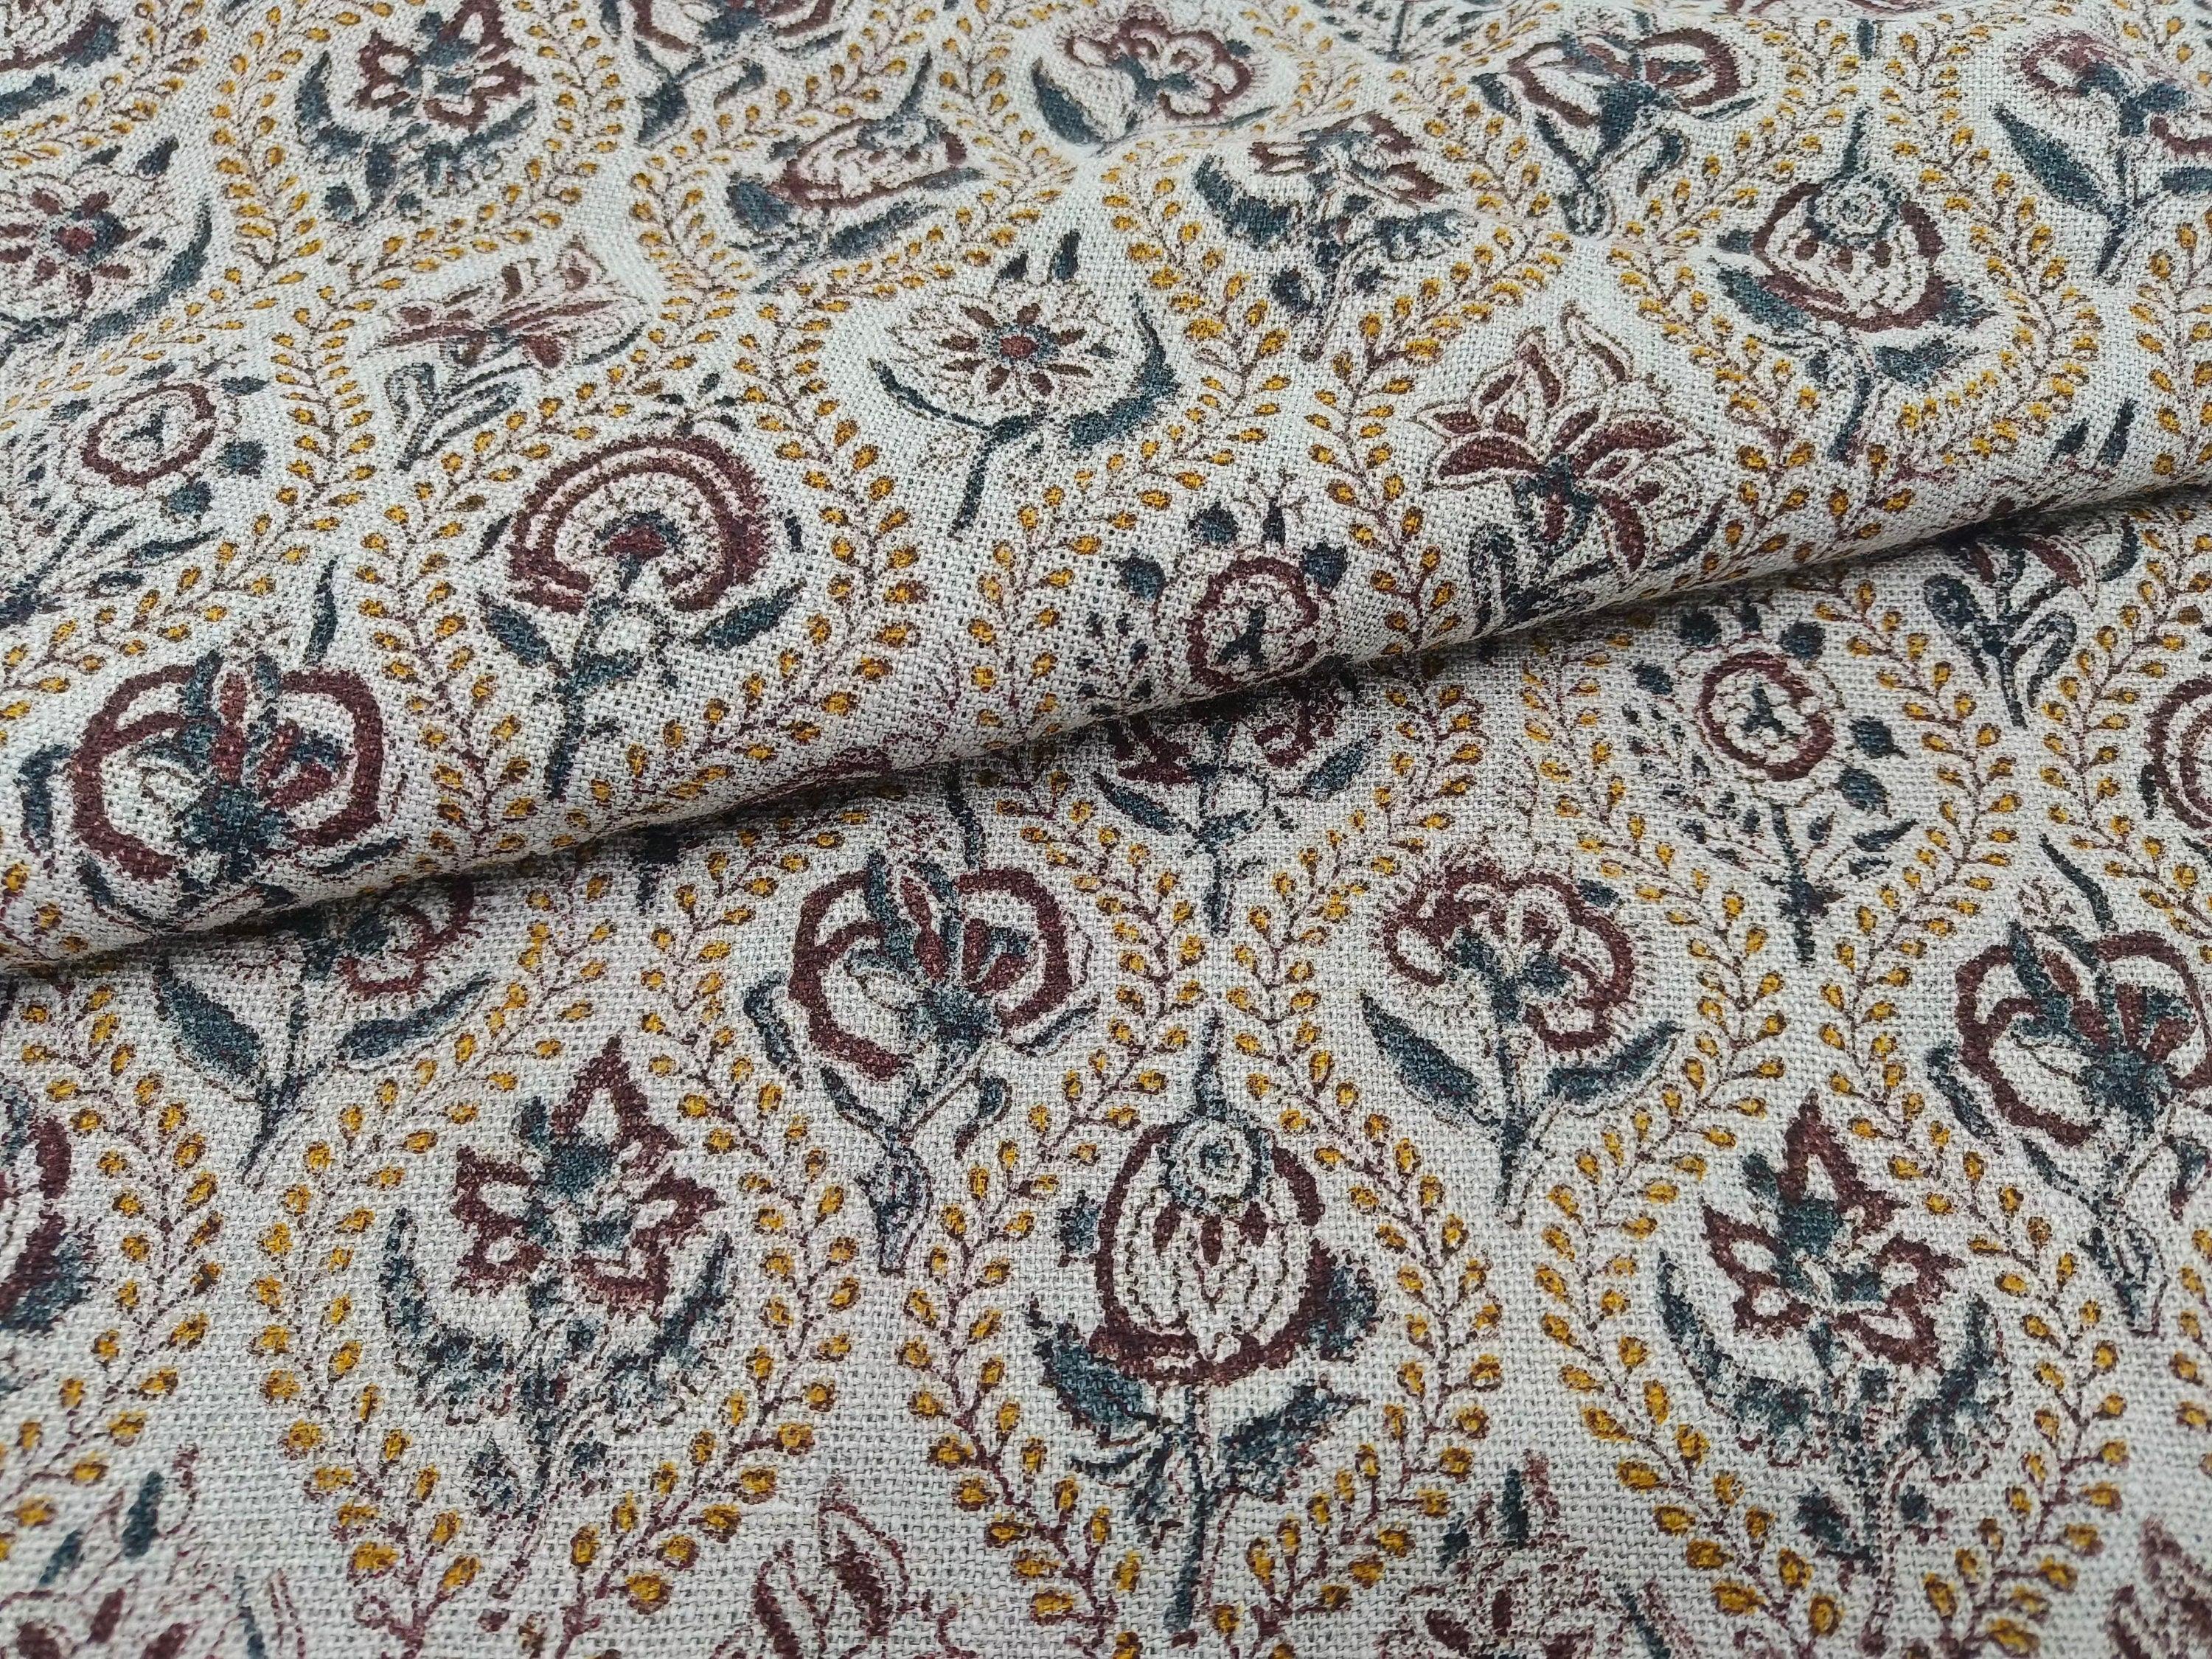 Amarbel  Sand Brown Floral Block Print Linen Fabric  Fabric By The Yard, Throw Pillow Cover Cushion Upholstery Cotton Linen